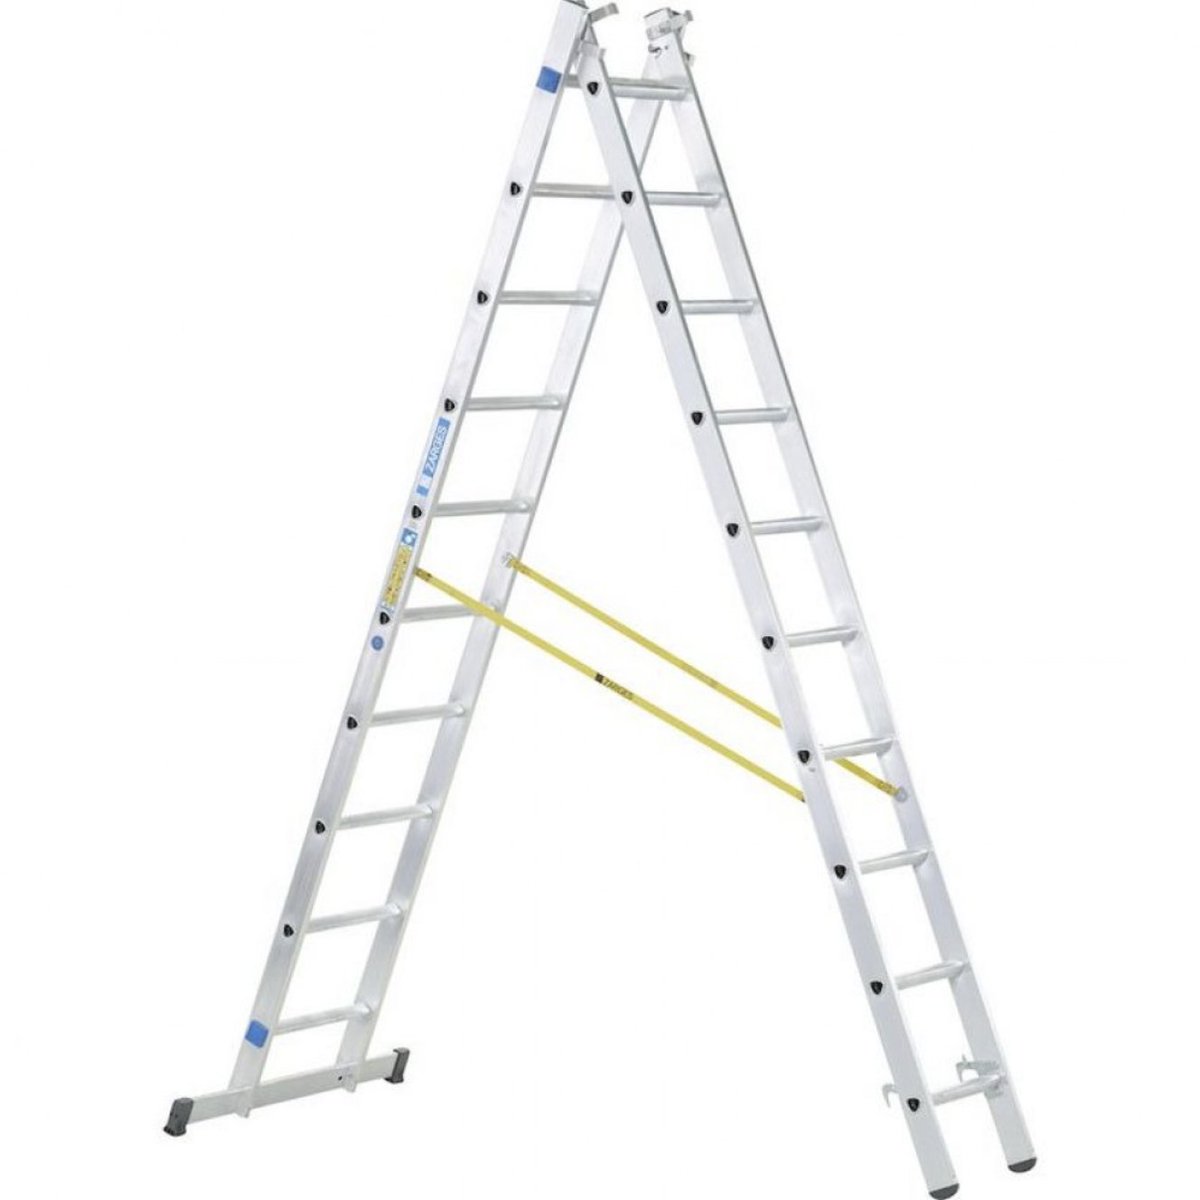 'Combimaster and Skymaster DX' - Designed and built to Zarges usual high standard and offering exceptional comfort by replacing the usual square rung with a more comfortable 'D' shaped rung 👍 

👉 midlandladders.com/Ladders/extens… 

#Zarges #ExtensionLadders #Safety